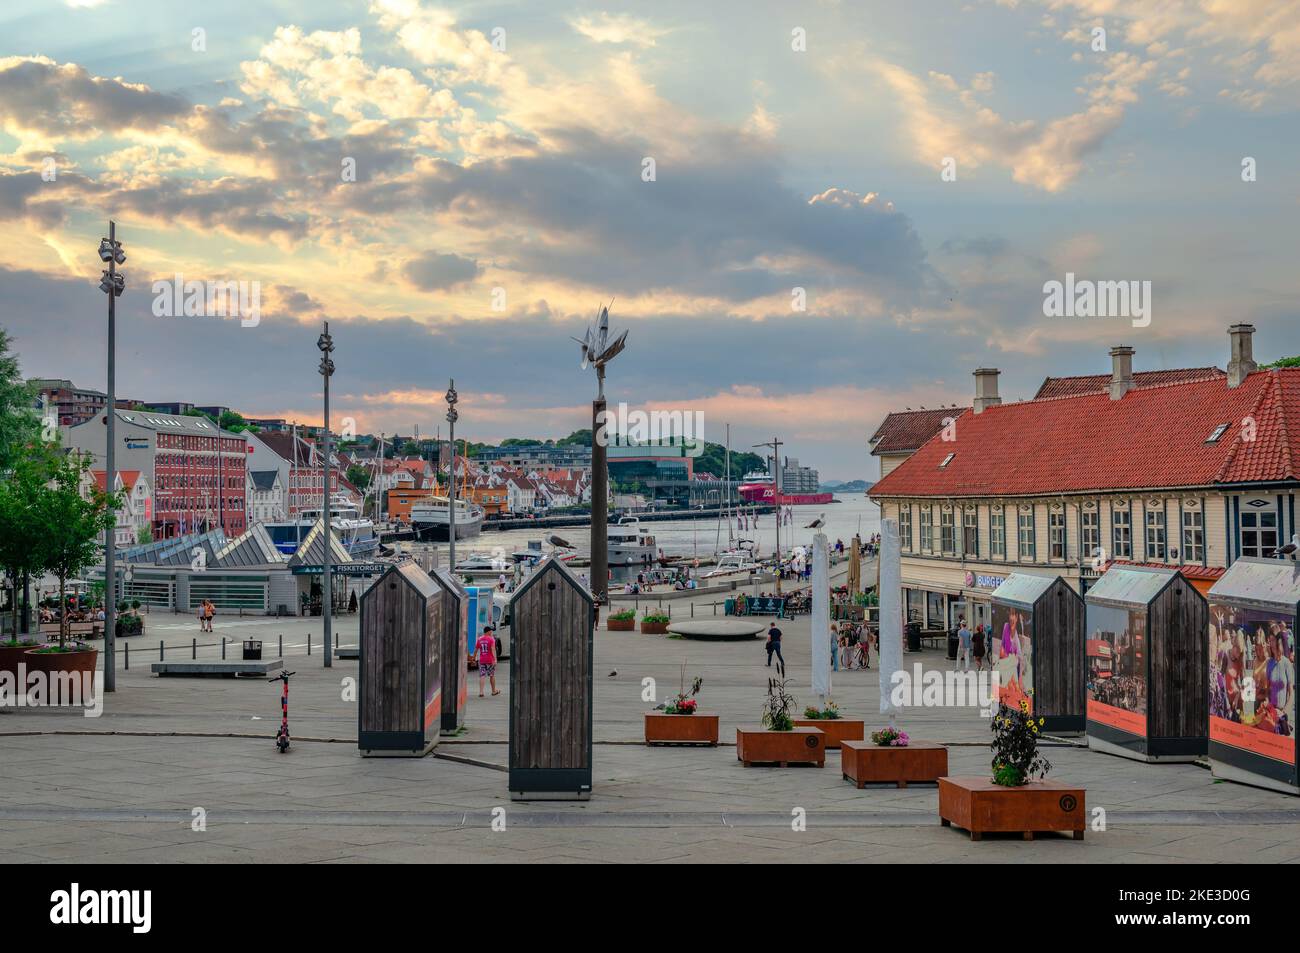 Stavanger, Norway - August 14 2022: View of Strandkaien quay in Vagen, the port area of the city, at sunset. Stock Photo